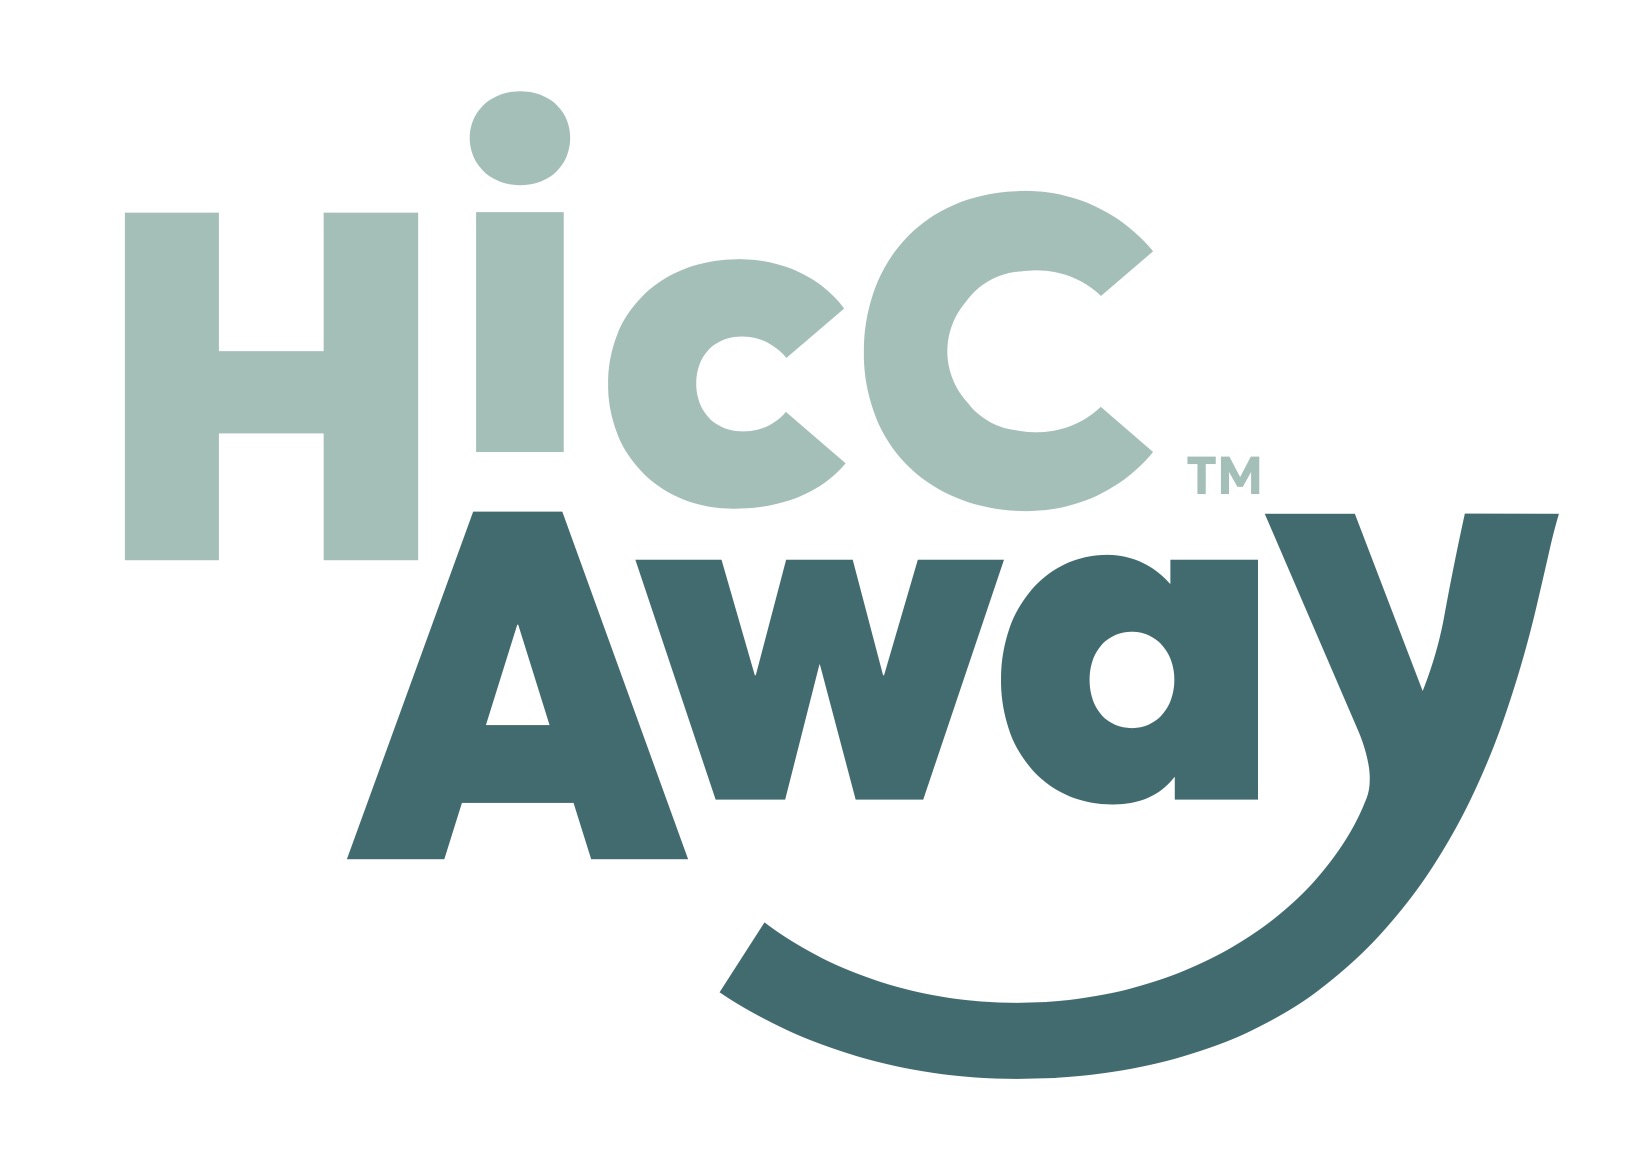 HiccAway is now available on Amazon.com, Amazon Canada, Amazon UK and Walmart.com, and at H-E-B stores in Texas